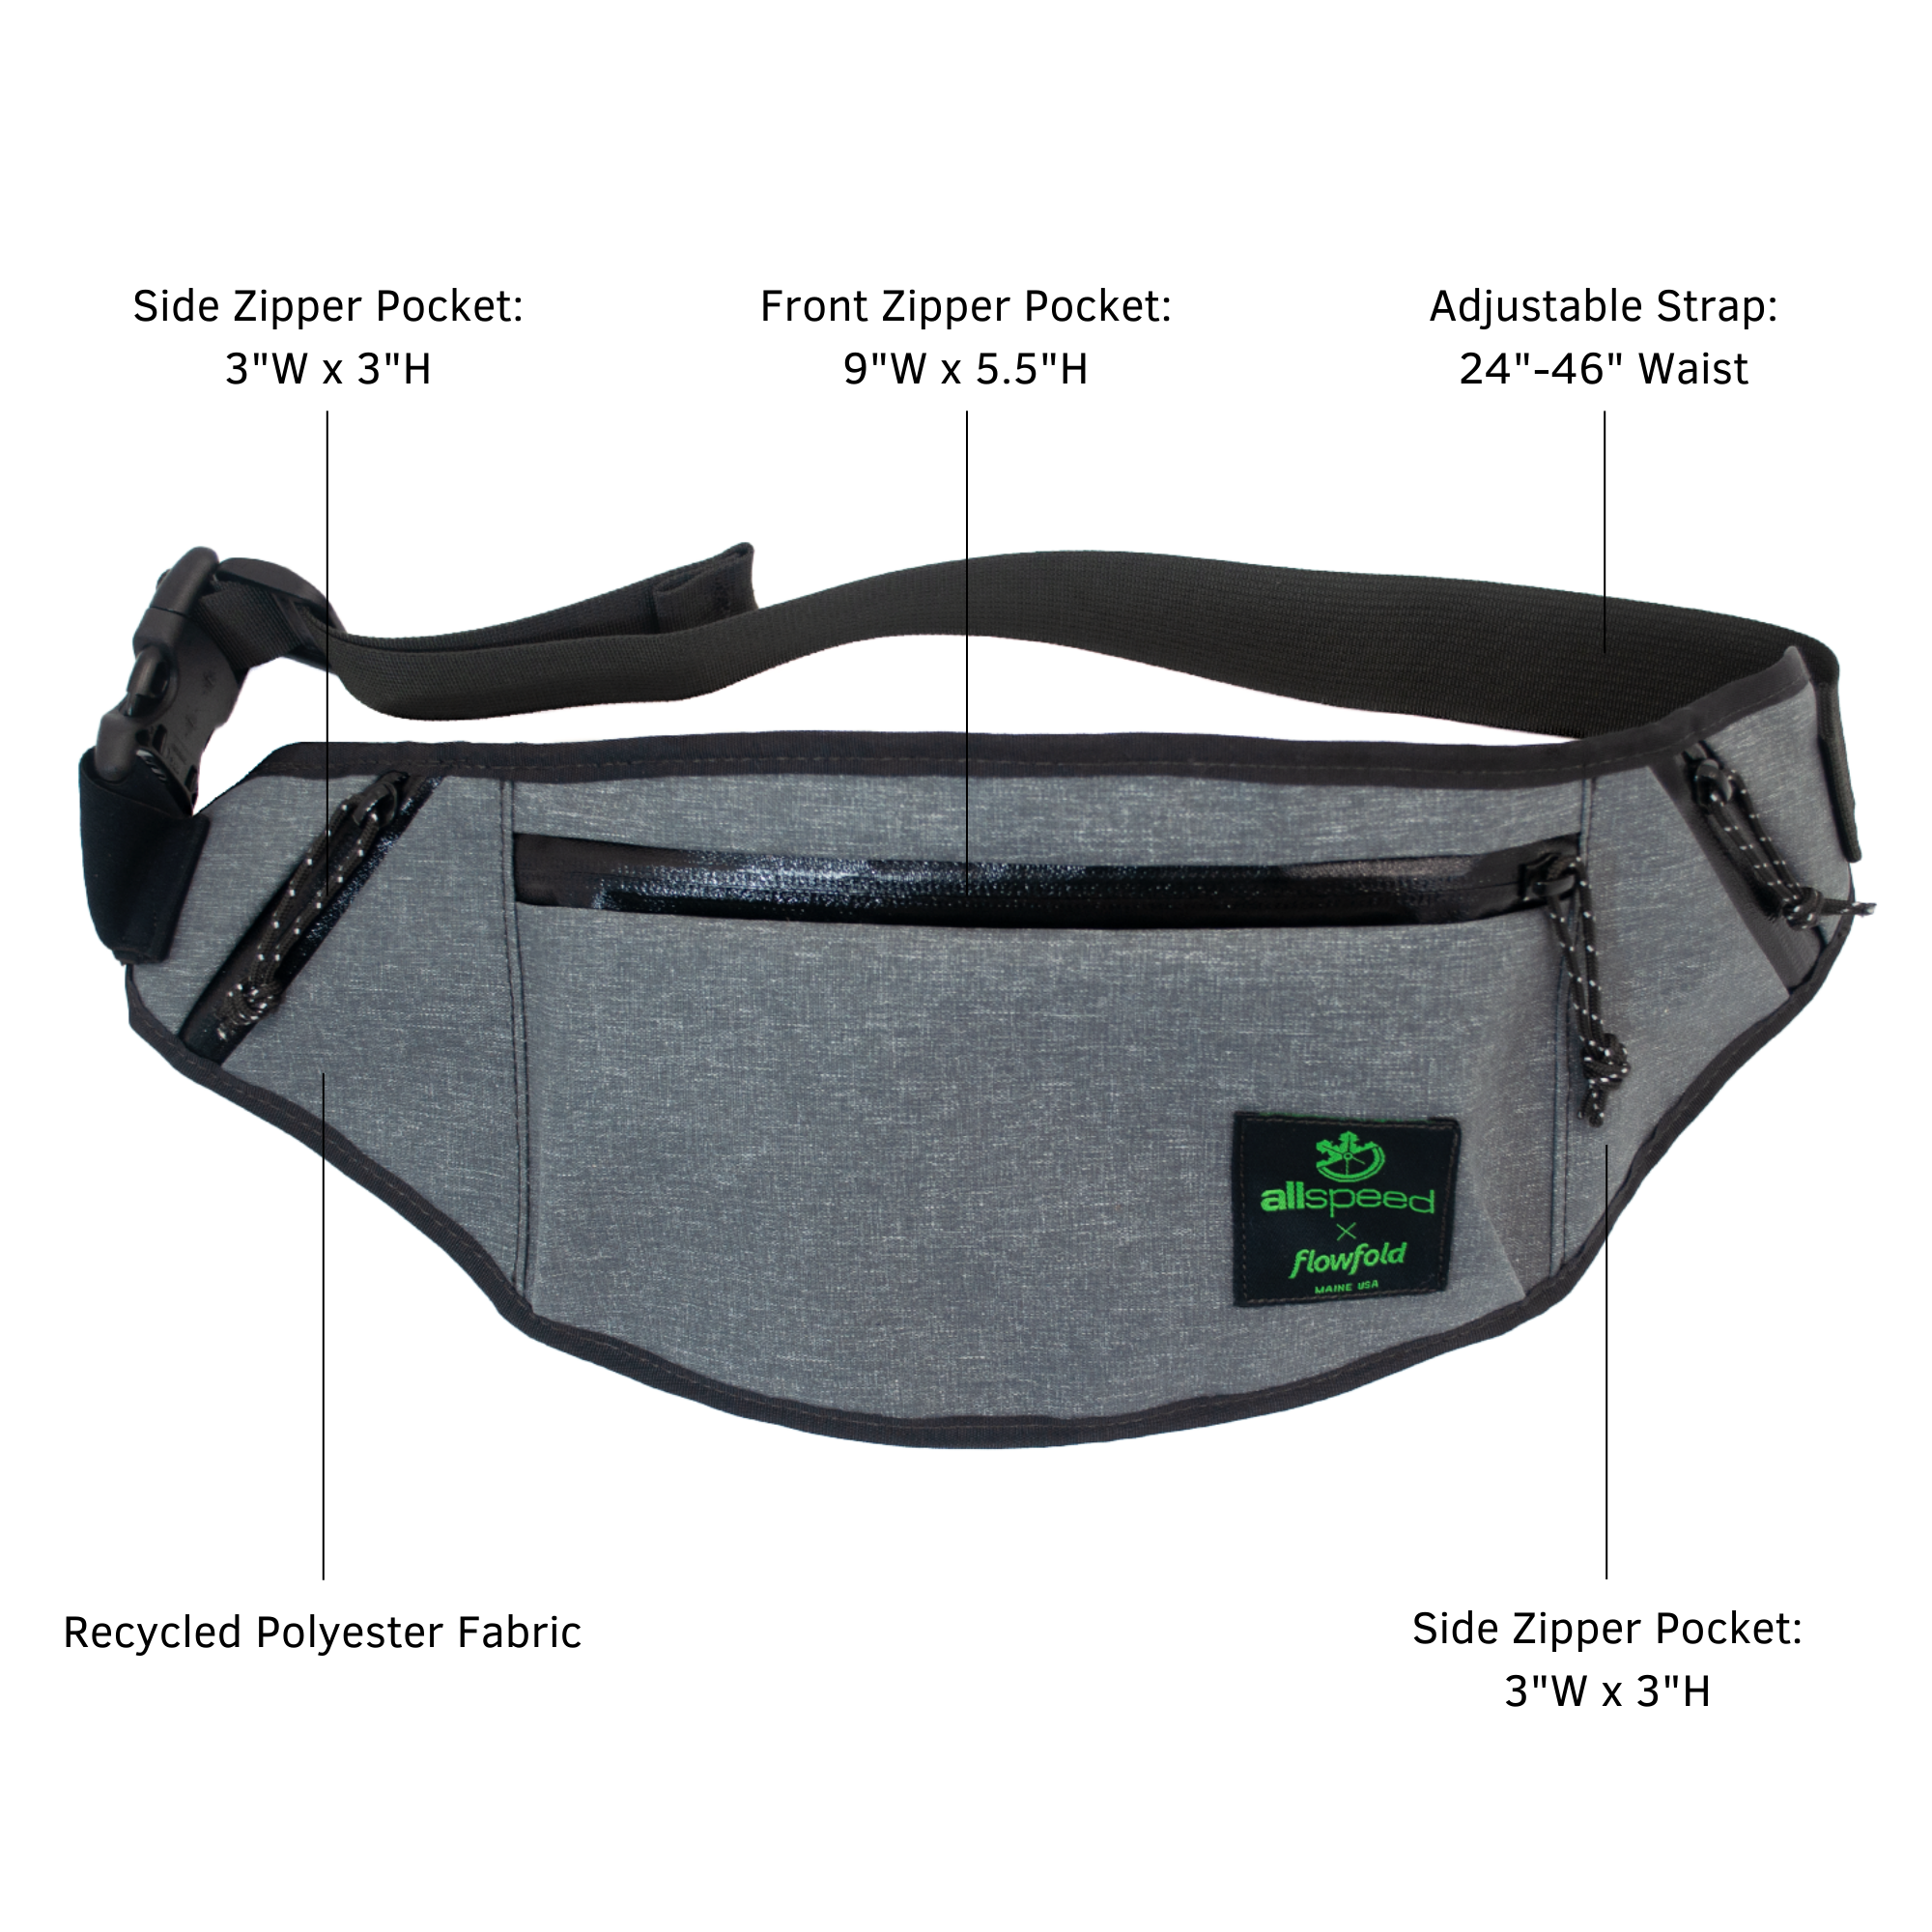 Allspeed x Flowfold Quick Rip Slim Pack- Recycled fabric, tech specs